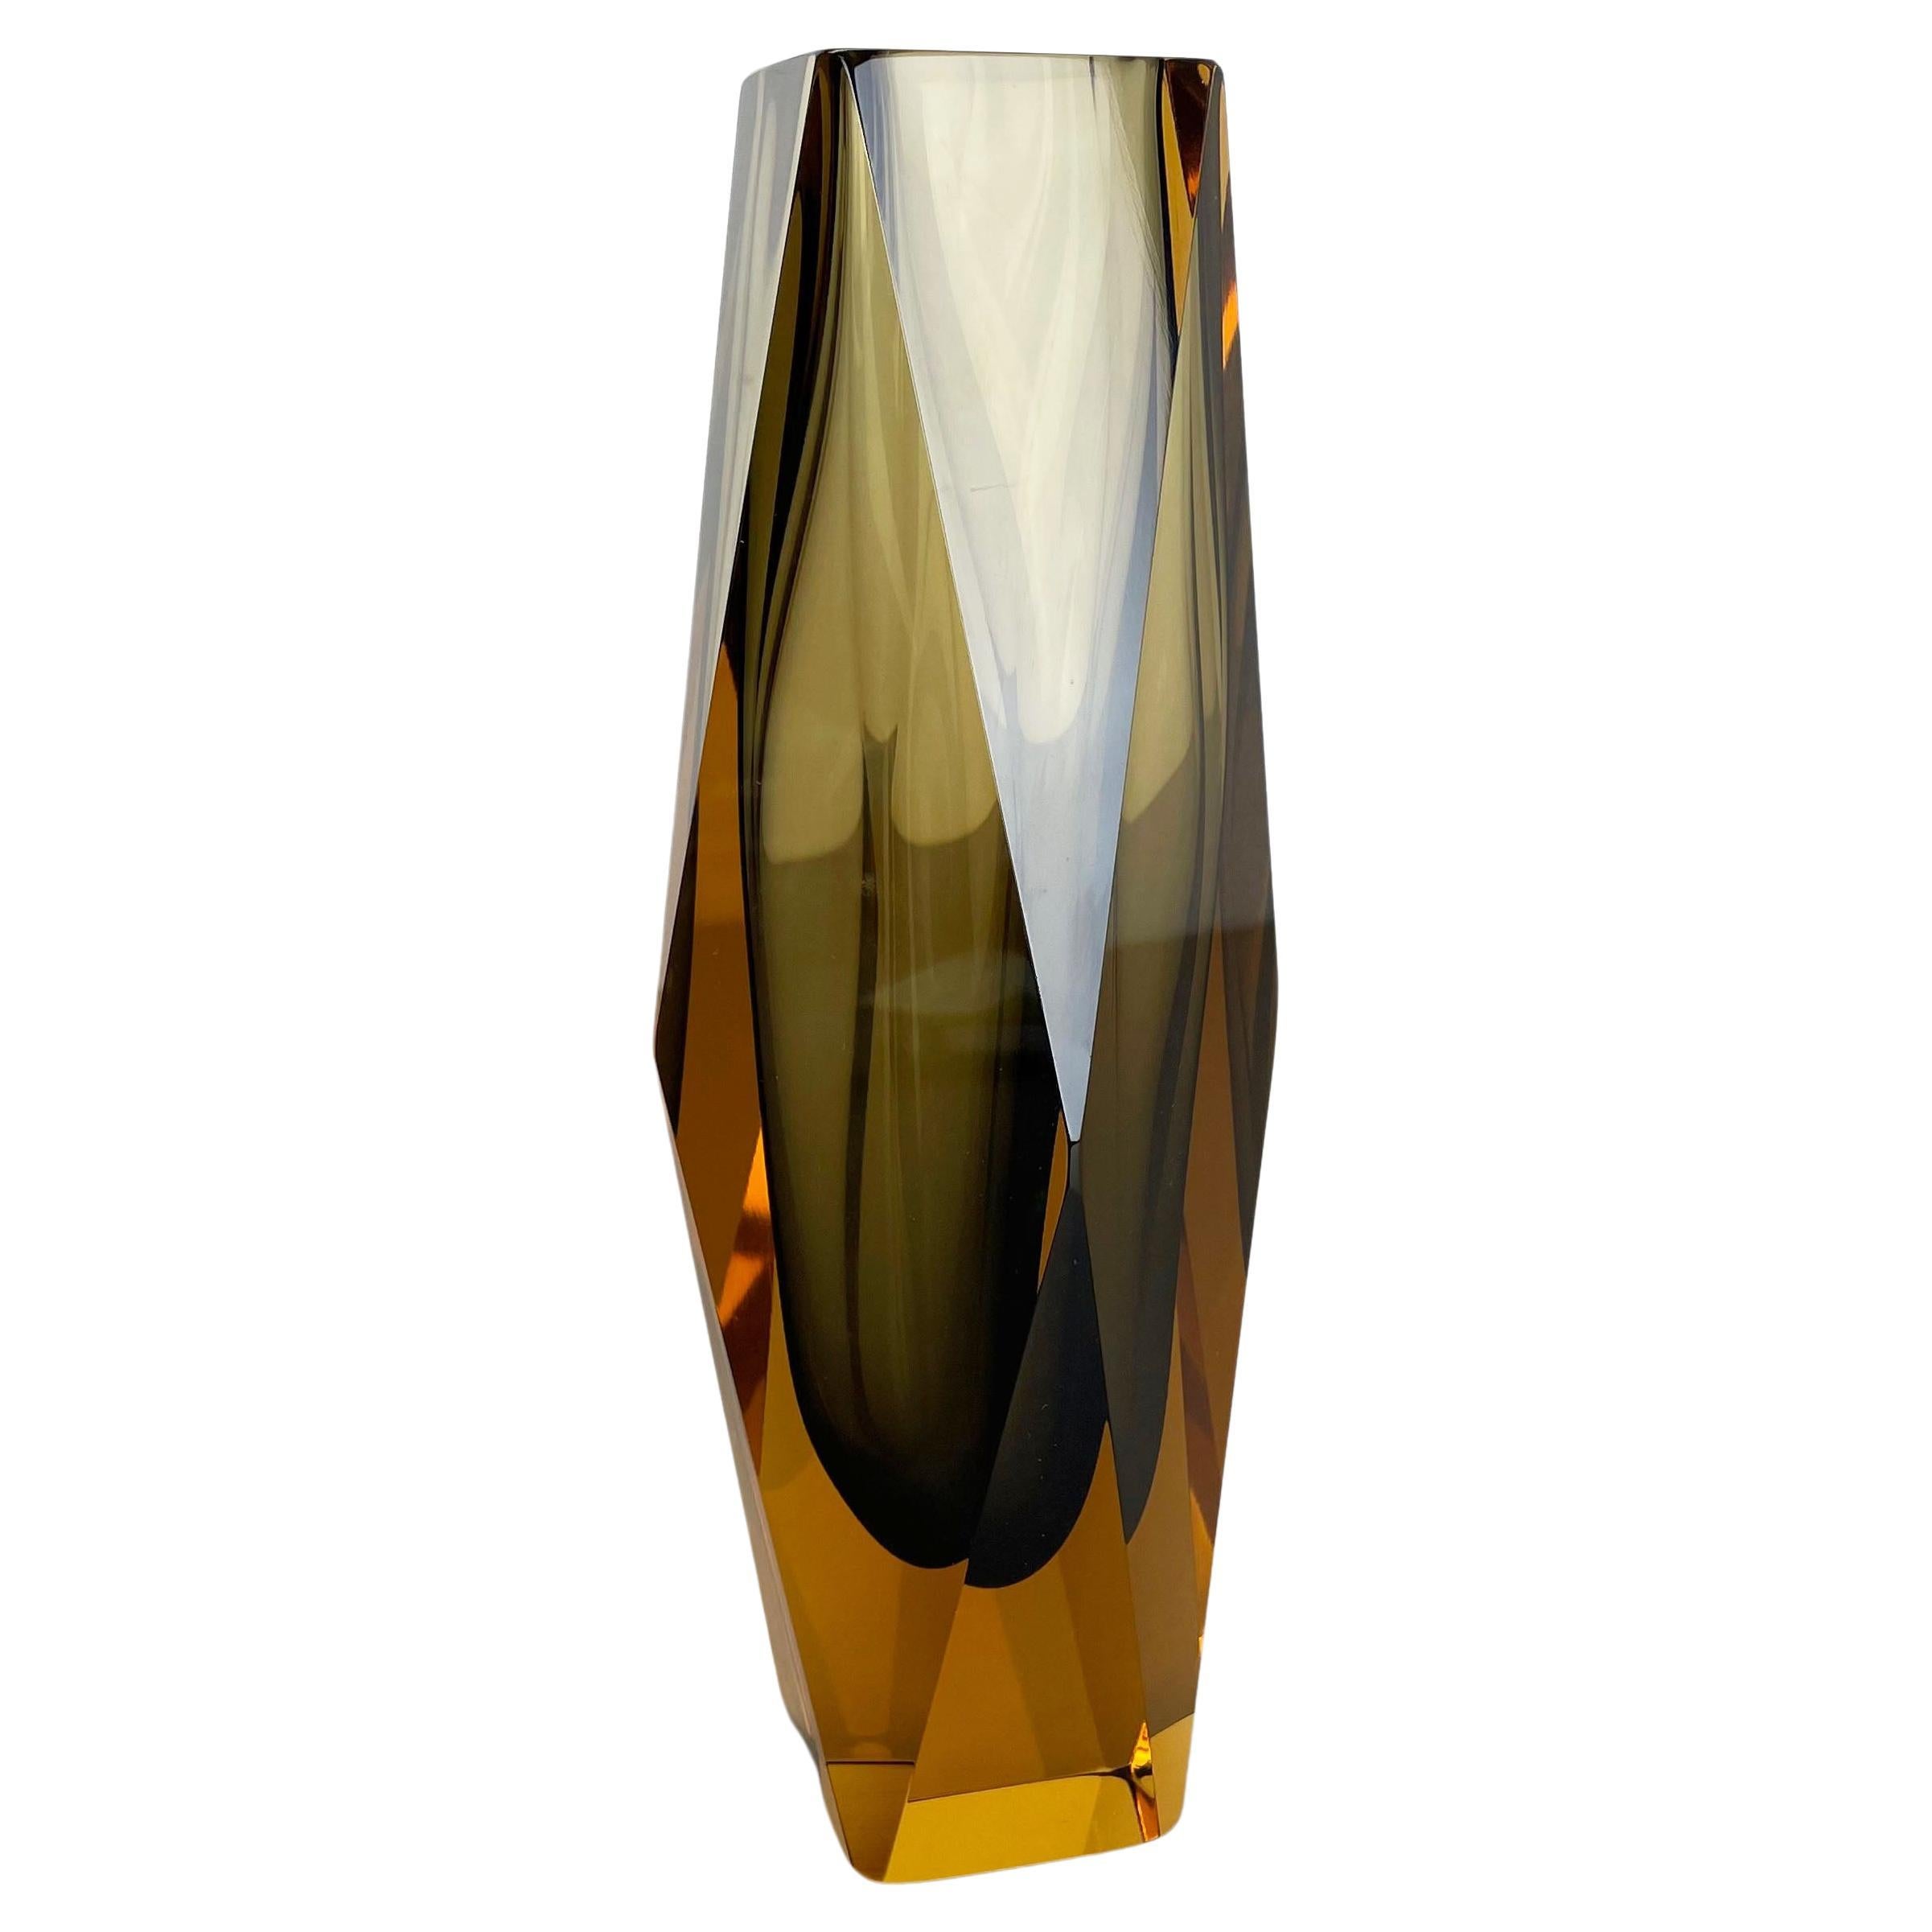 Large Mandruzzato 2,9kg Faceted Glass Sommerso Vase, Murano, Italy 1970s